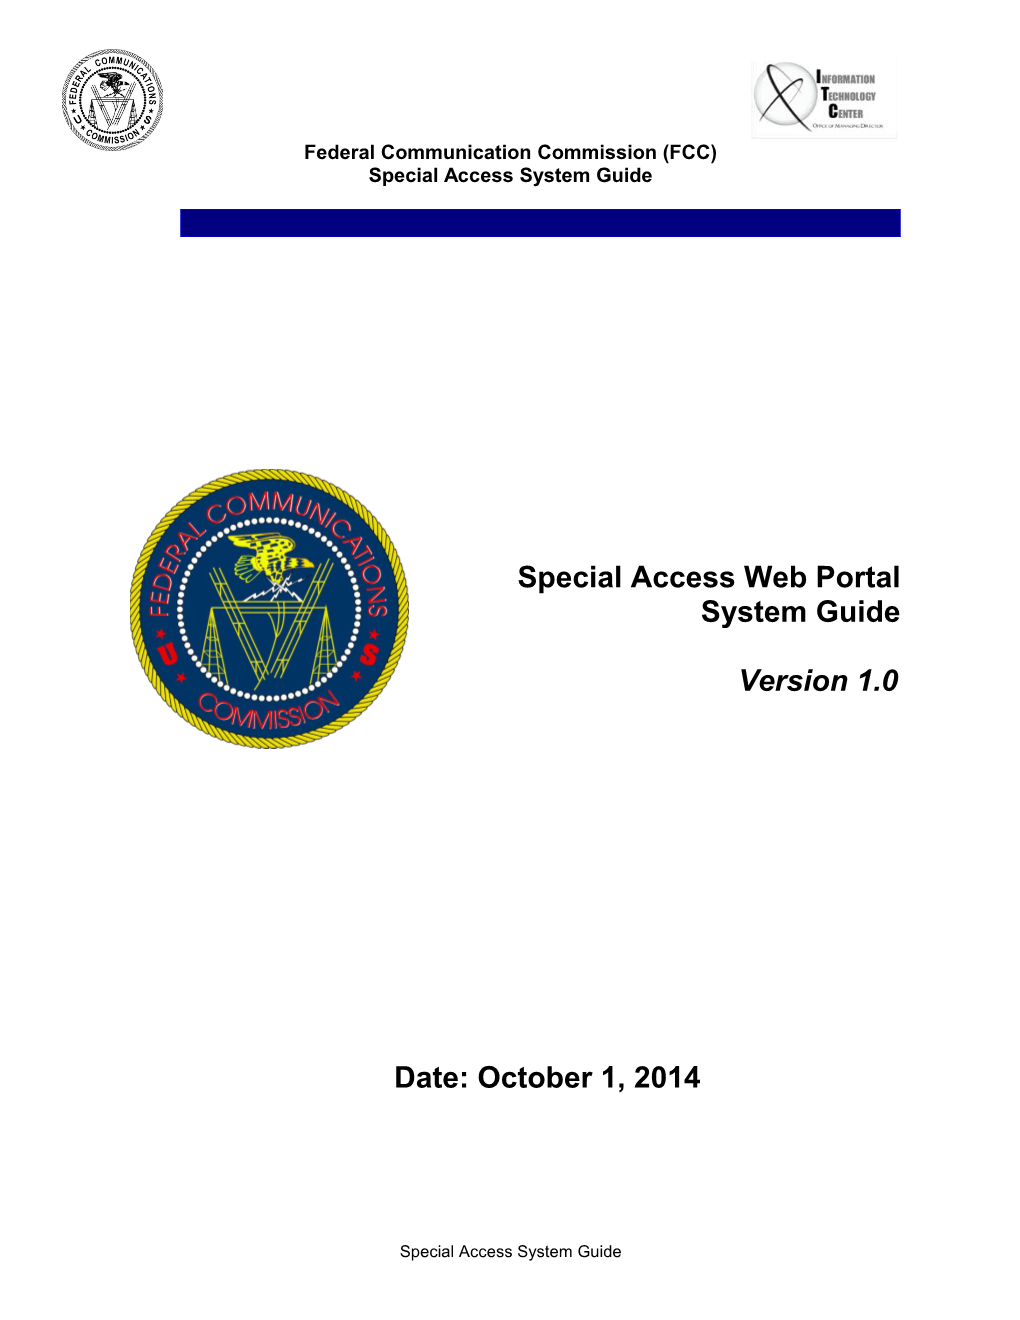 Special Access Web Portal System Guide